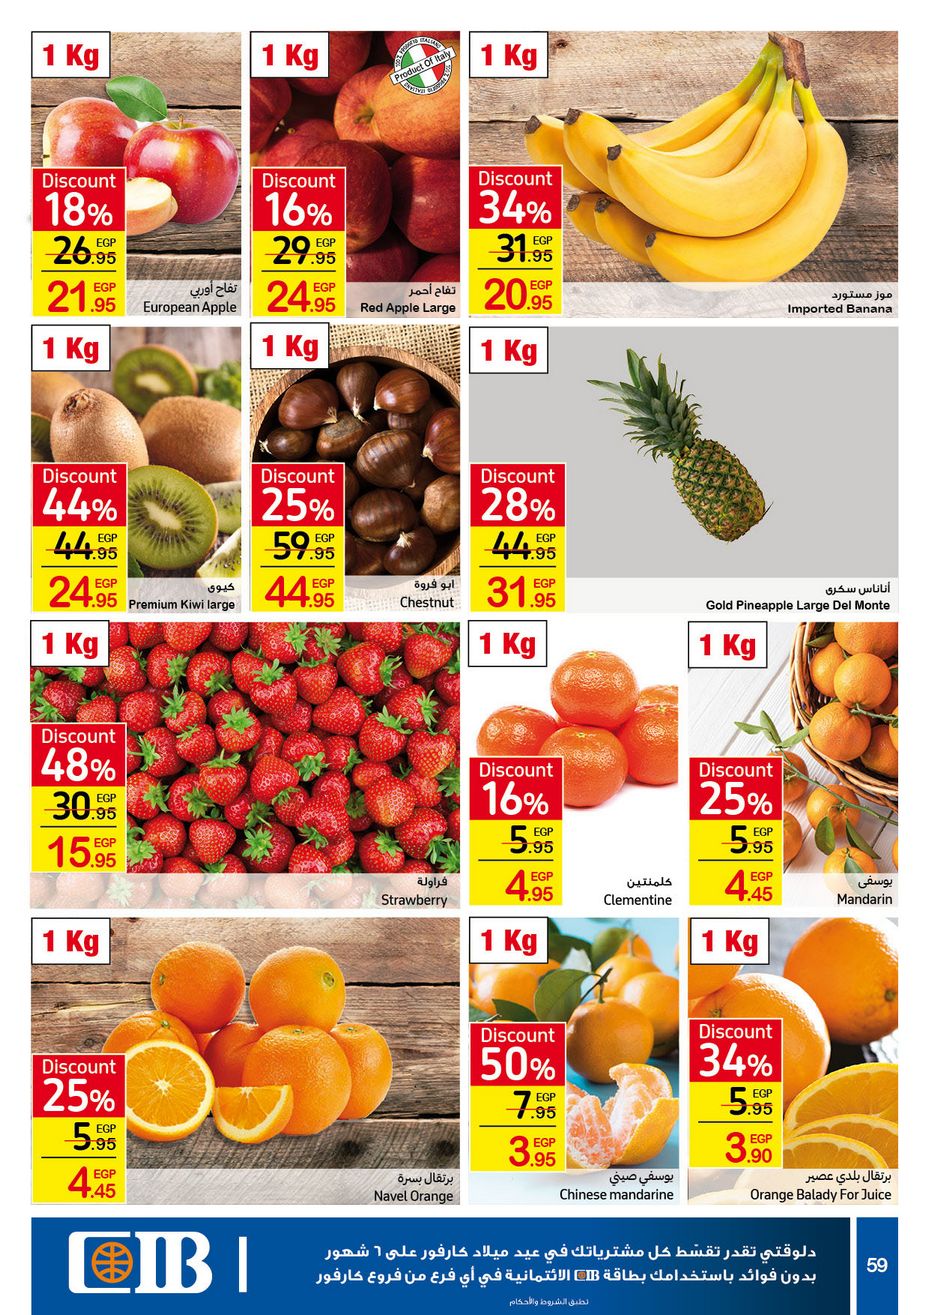 Carrefour Anniversary Offers till 18/2/2021 | Carrefour Egypt 60